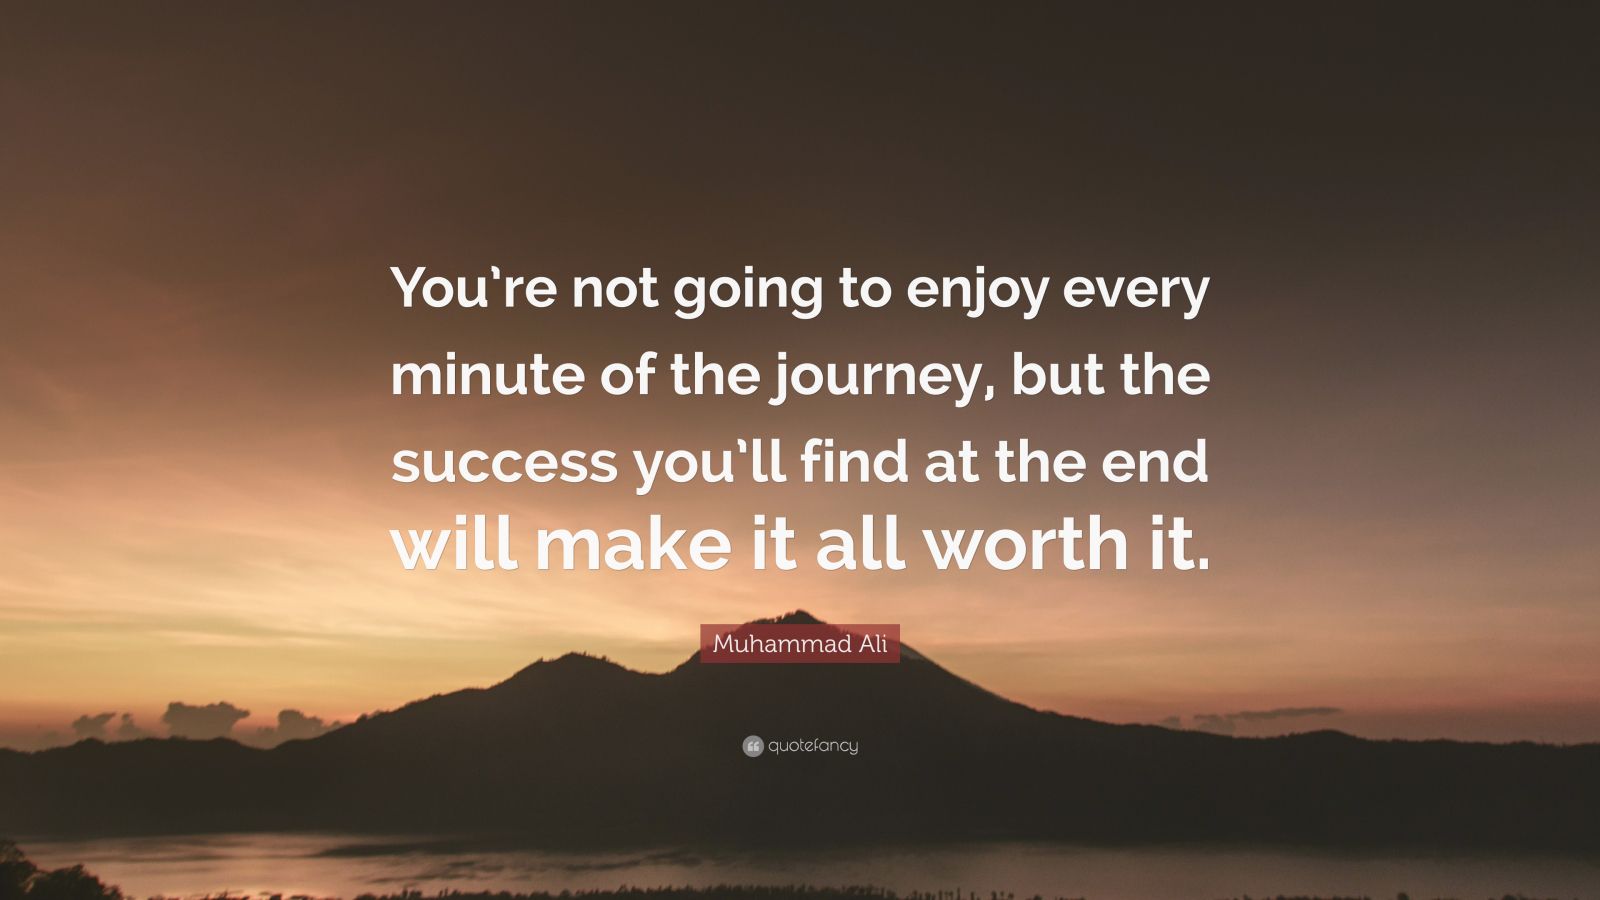 Muhammad Ali Quote: “You’re not going to enjoy every minute of the